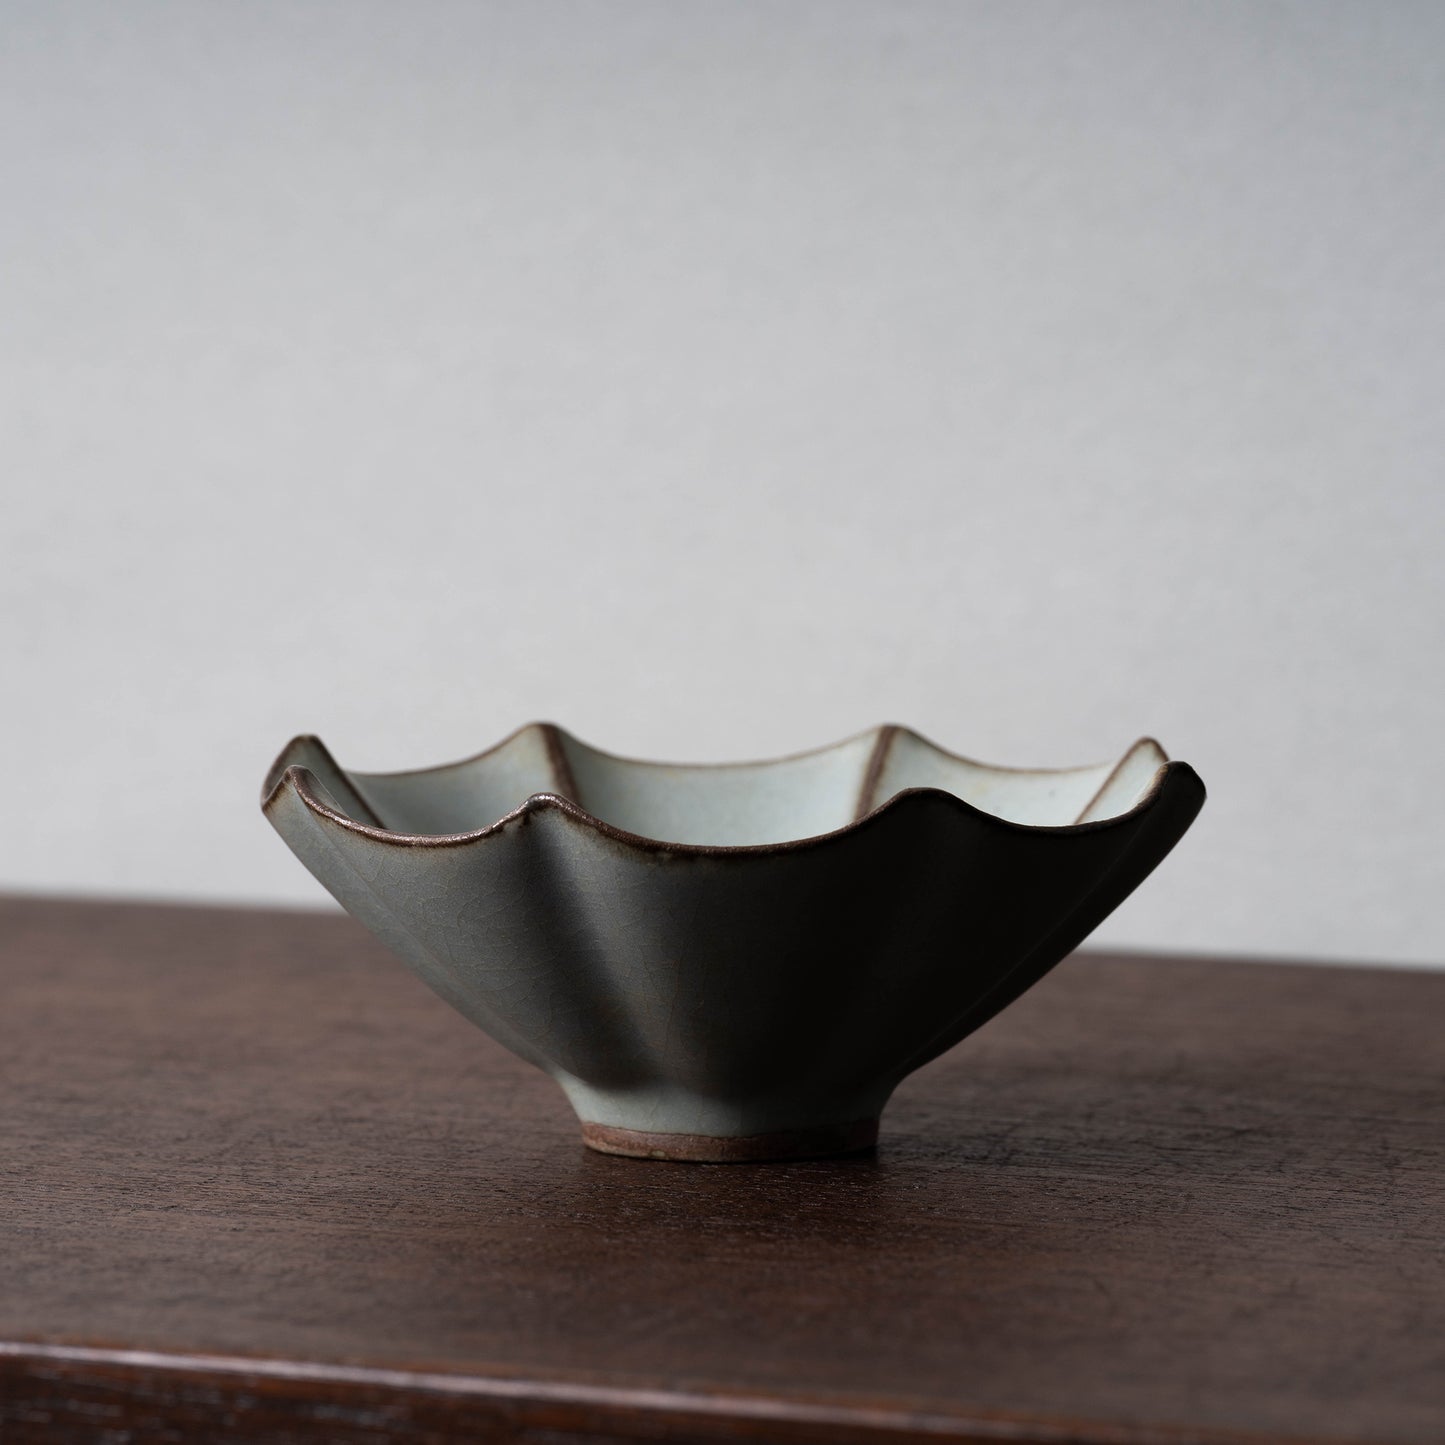 Southern Song Dynasty Guan ware Celadon Tea bowl with Flower Design